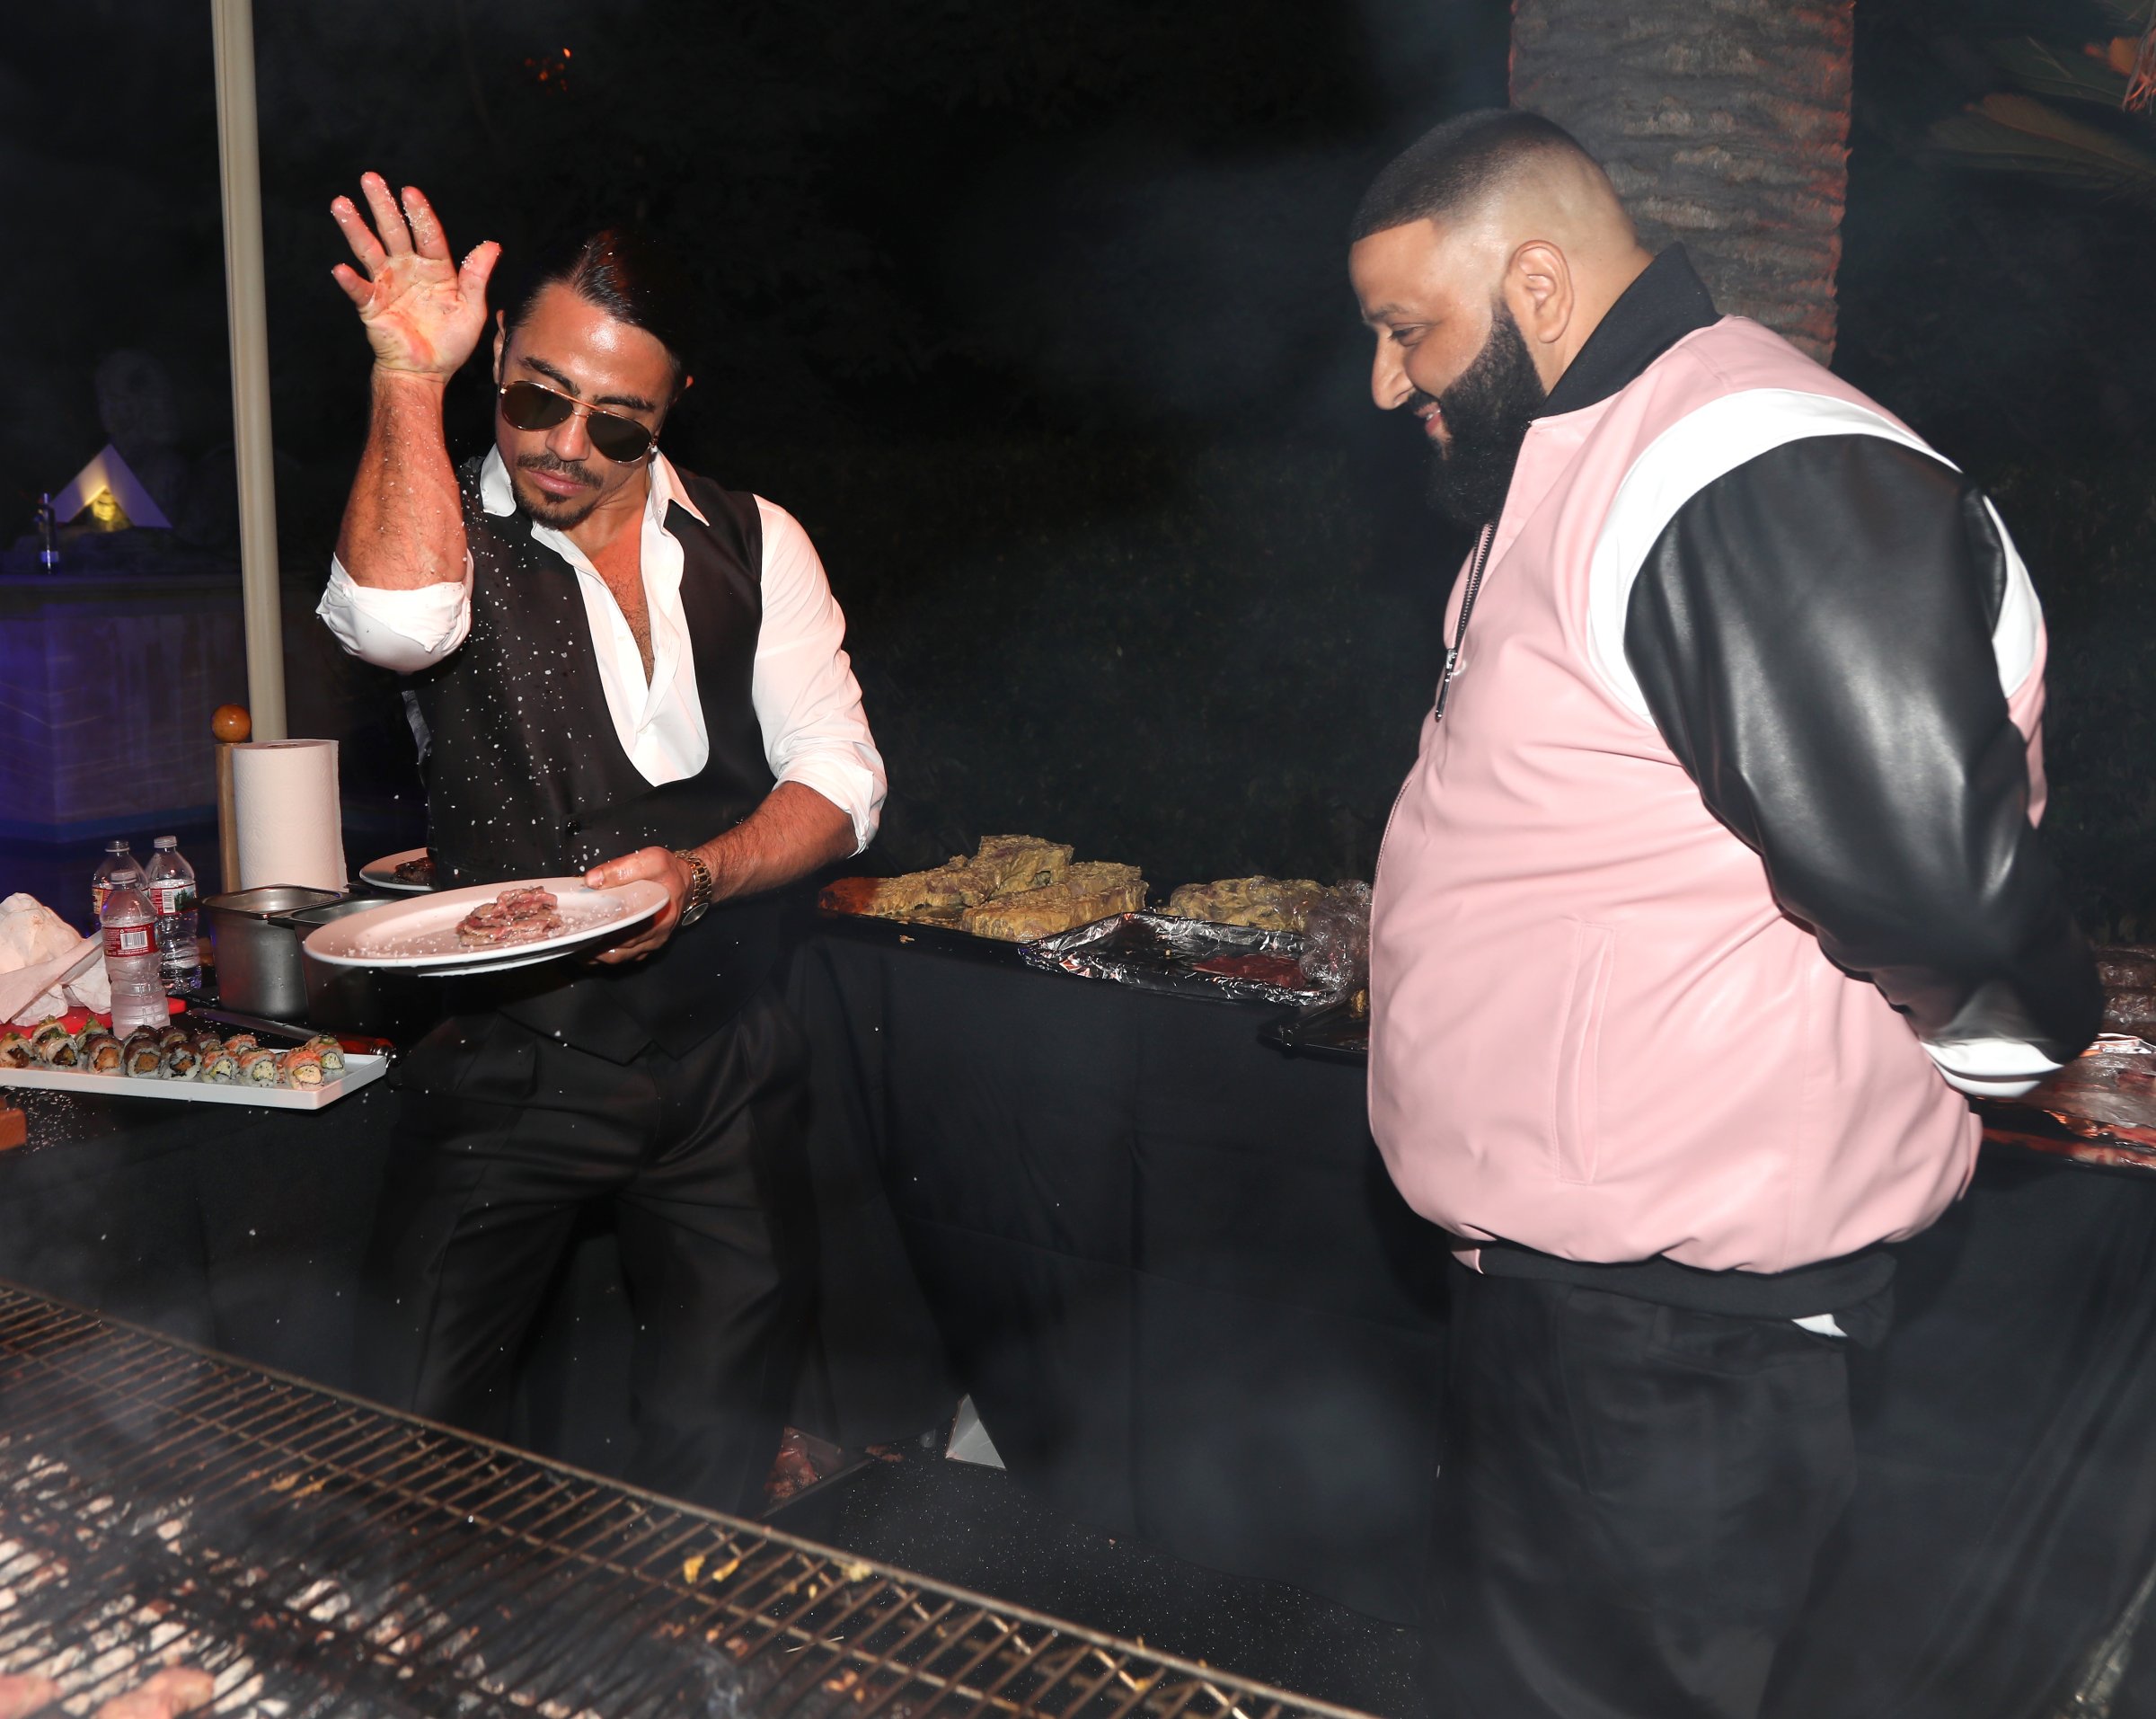 The Four Cast Sean 'Diddy' Combs, Fergie and Meghan Trainor Host DJ Khaled's Birthday Presented by CIROC and Fox in Beverly Hills